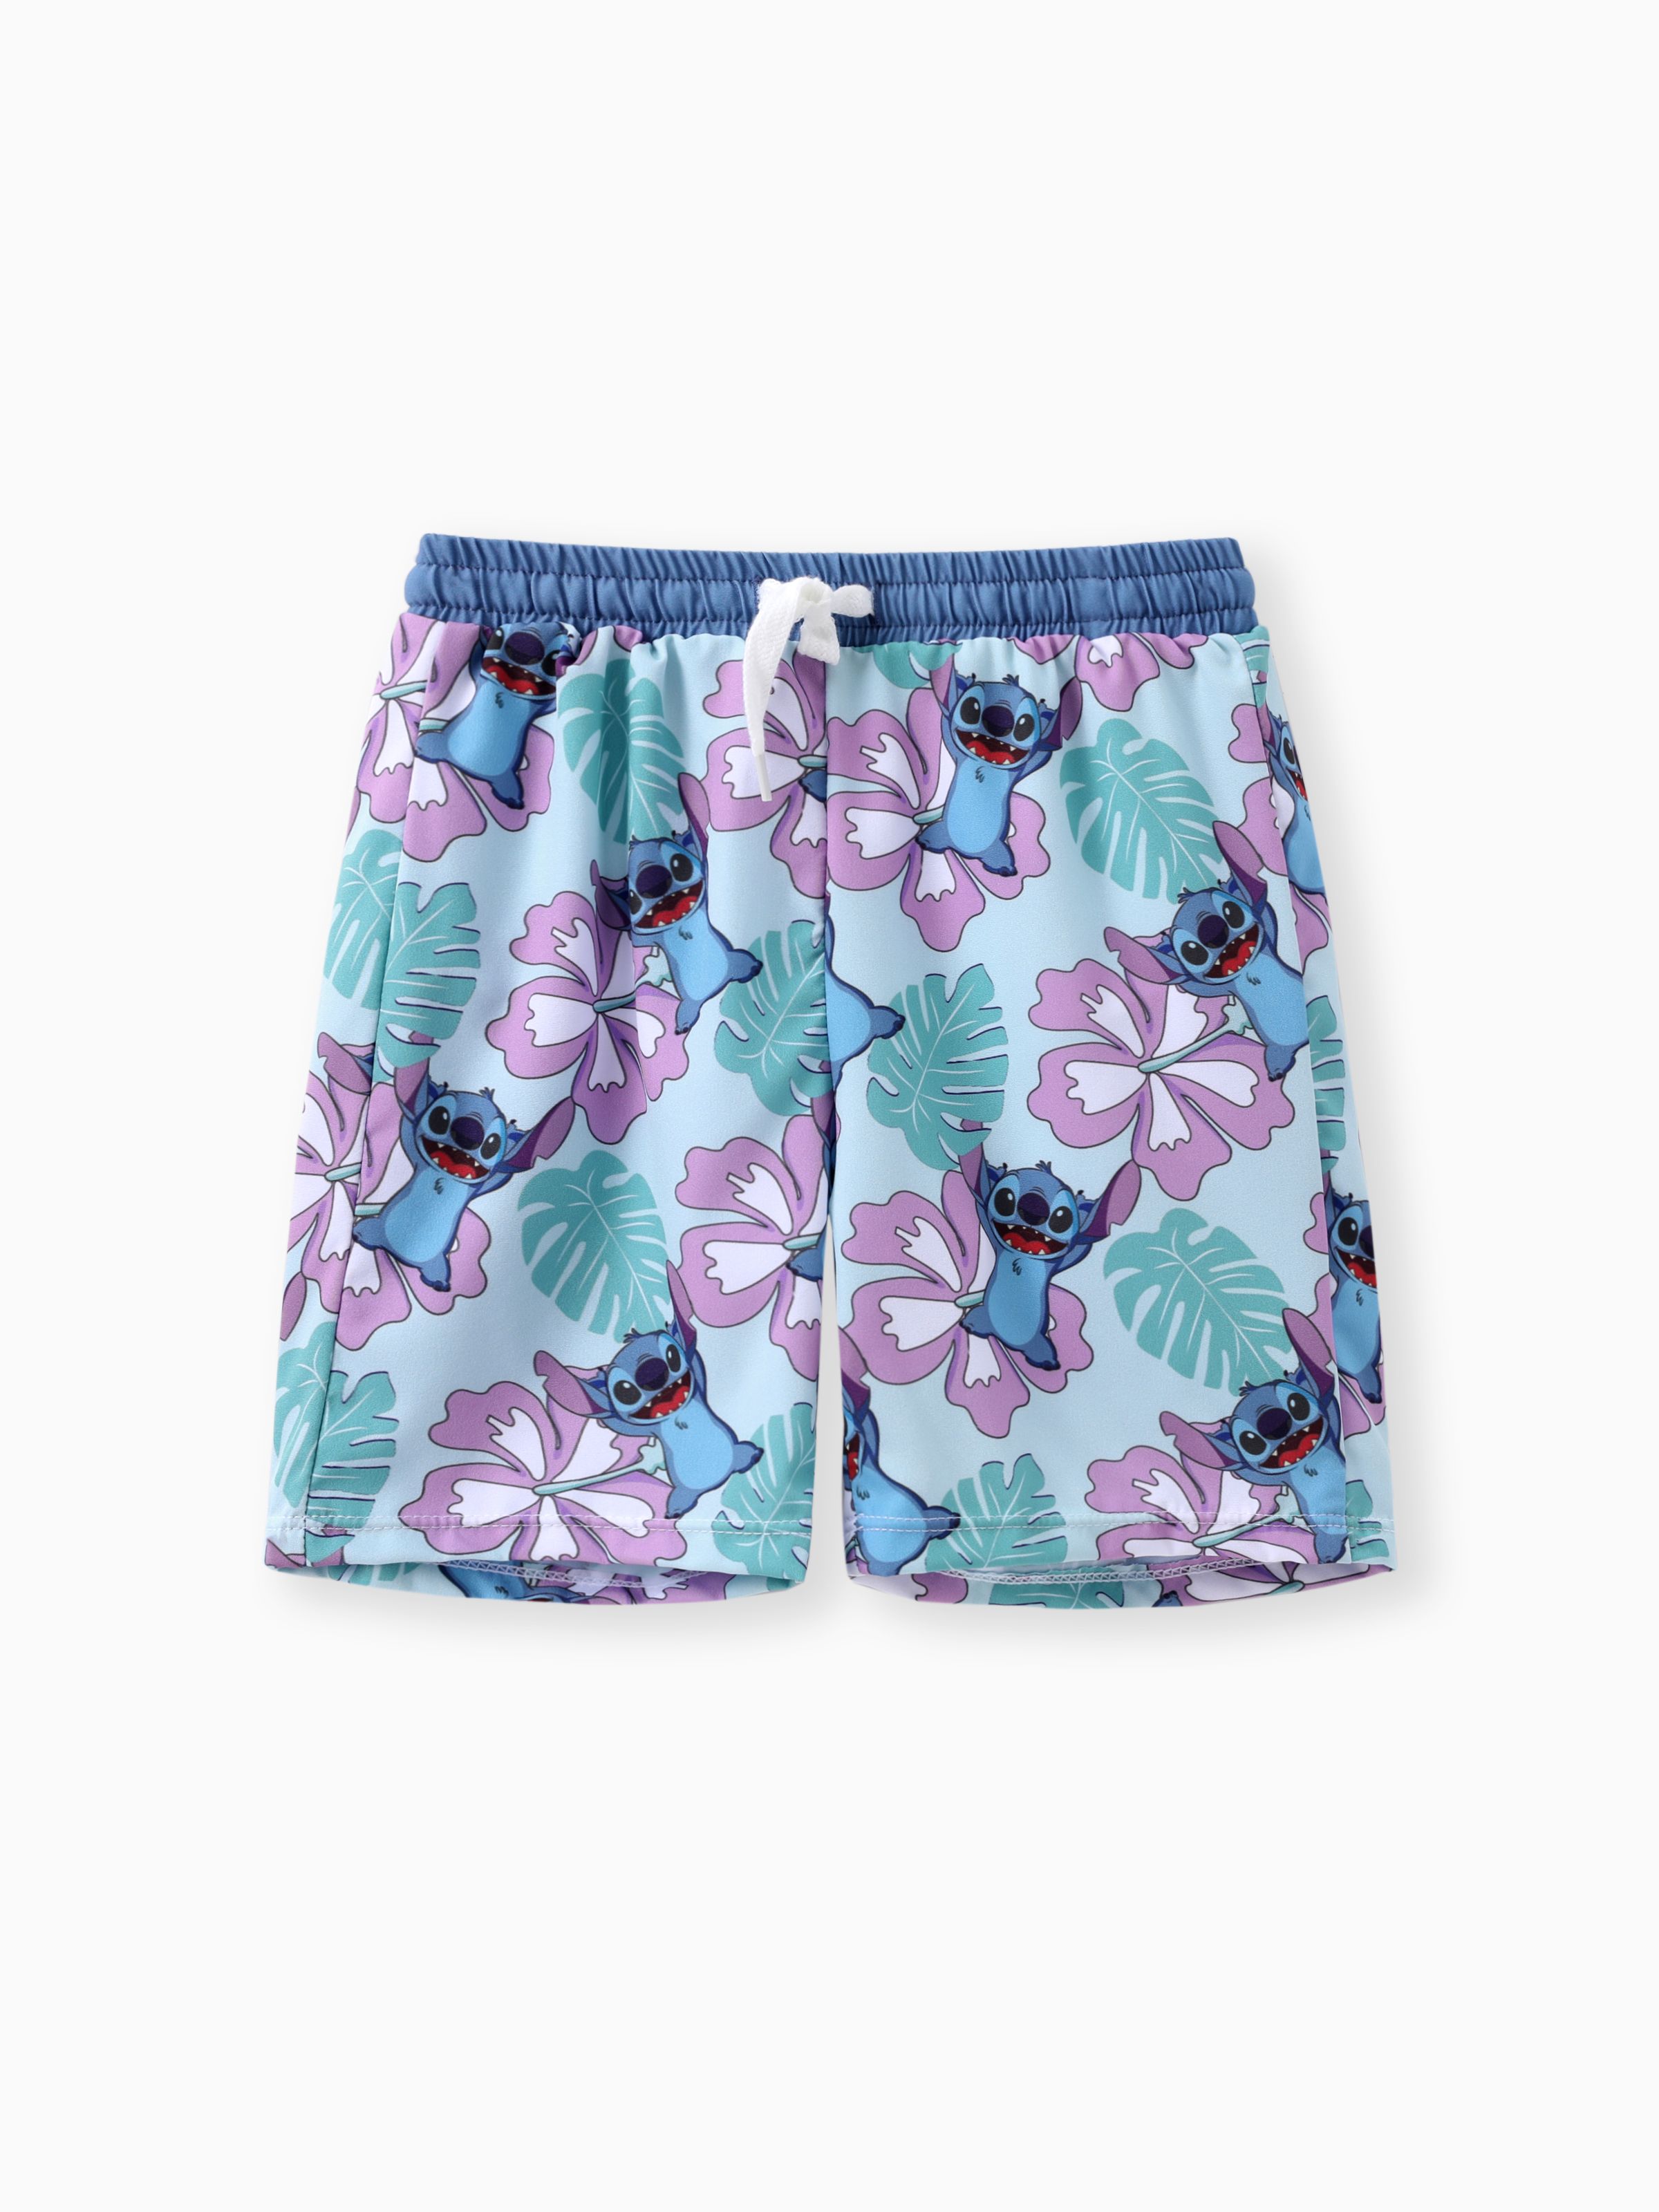 

Disney Stitch Toddler/Kid Girls/Boys 1pc Hawaii Floral Style Character Print Swimsuit/Swimming Trunks